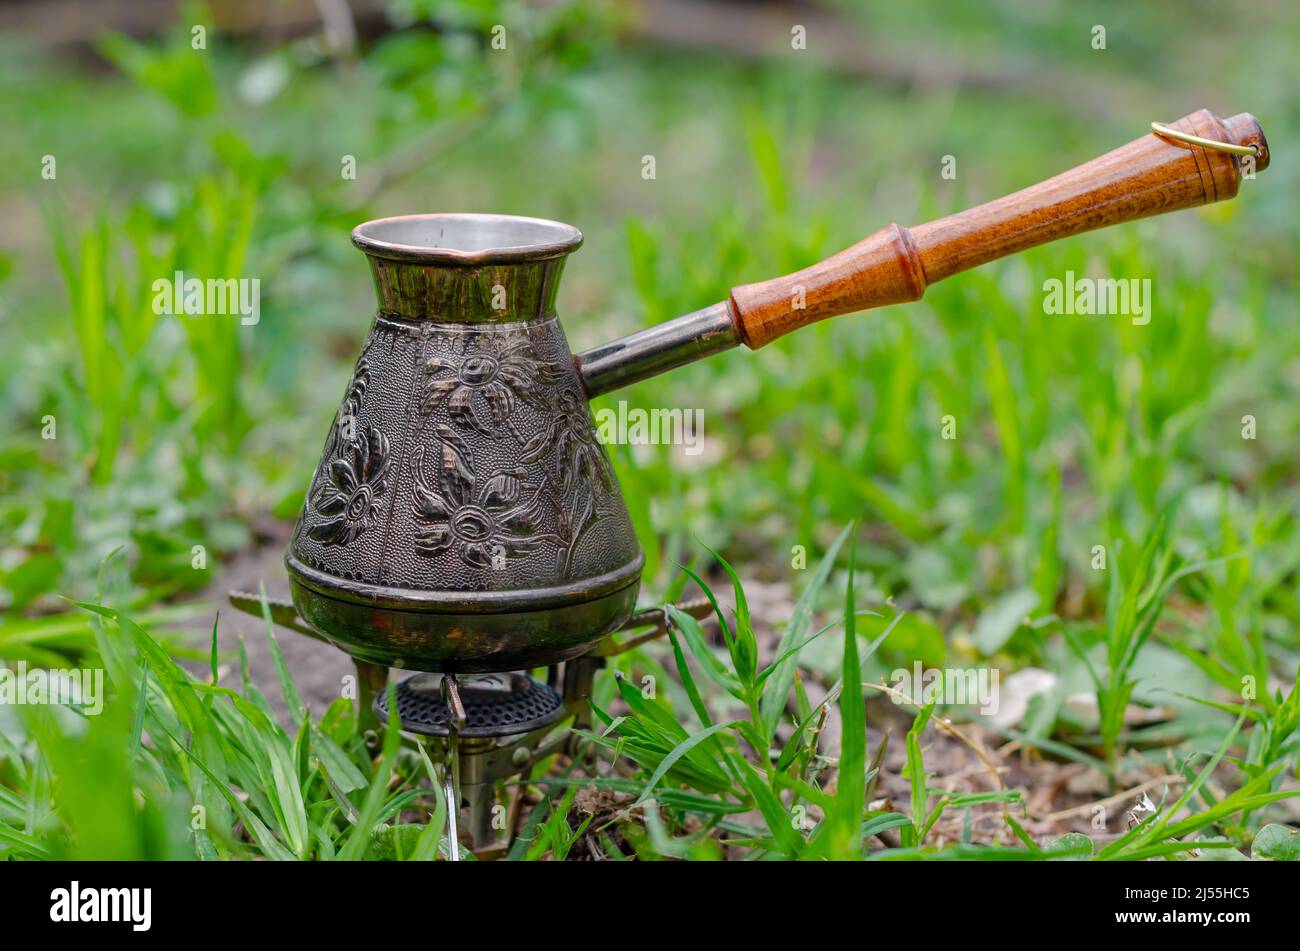 Coffee maker in nature. Turk with coffee on camp gas burner. Rest outside city. Stock Photo